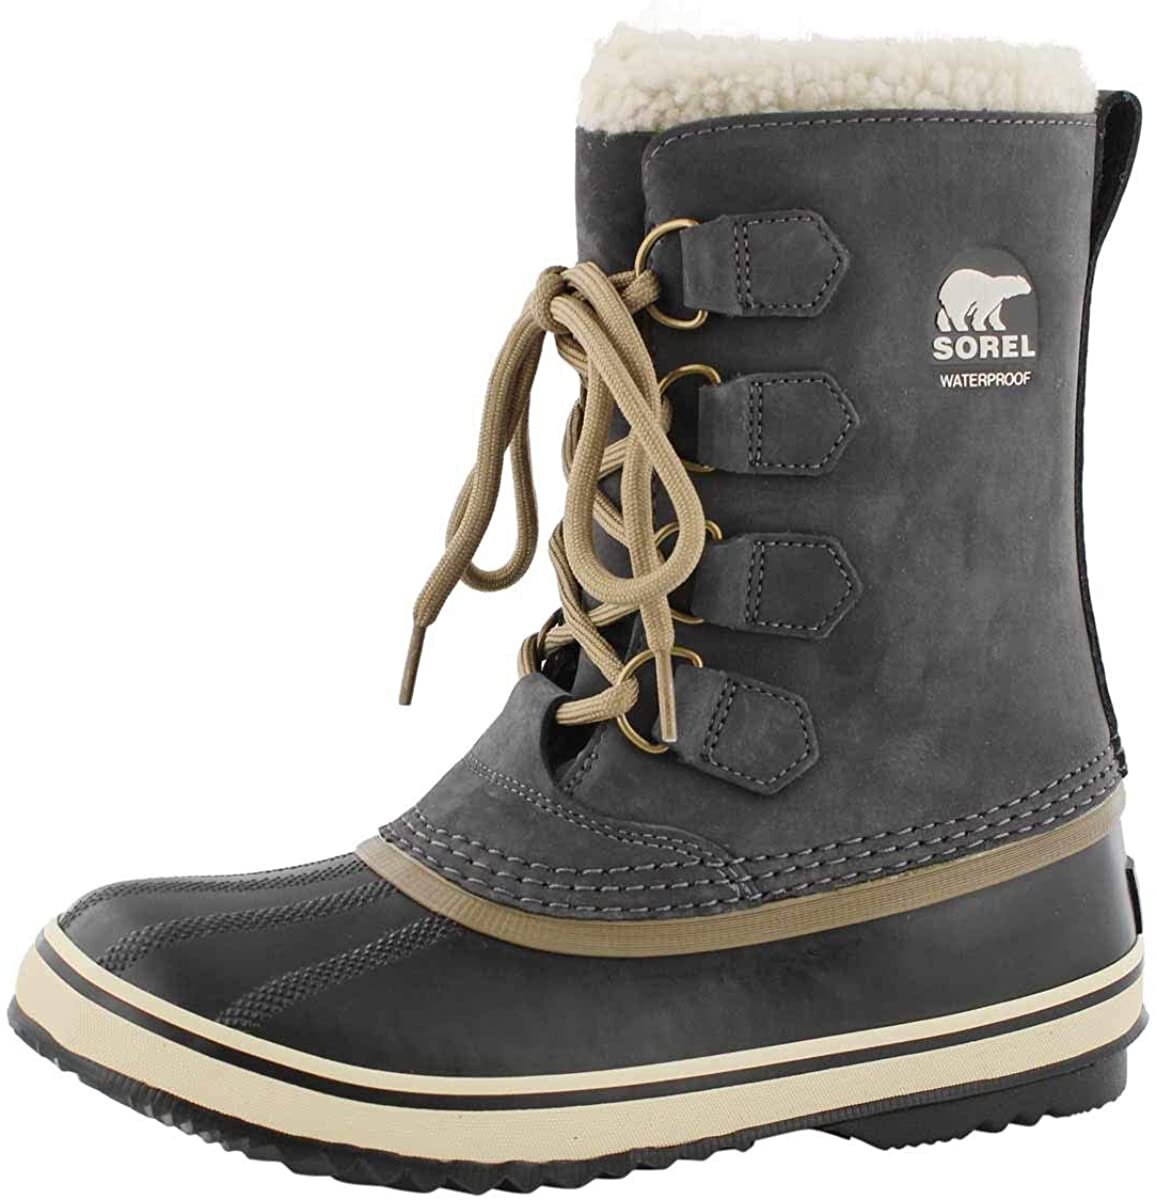 Sorel Women's Boots From £97.99